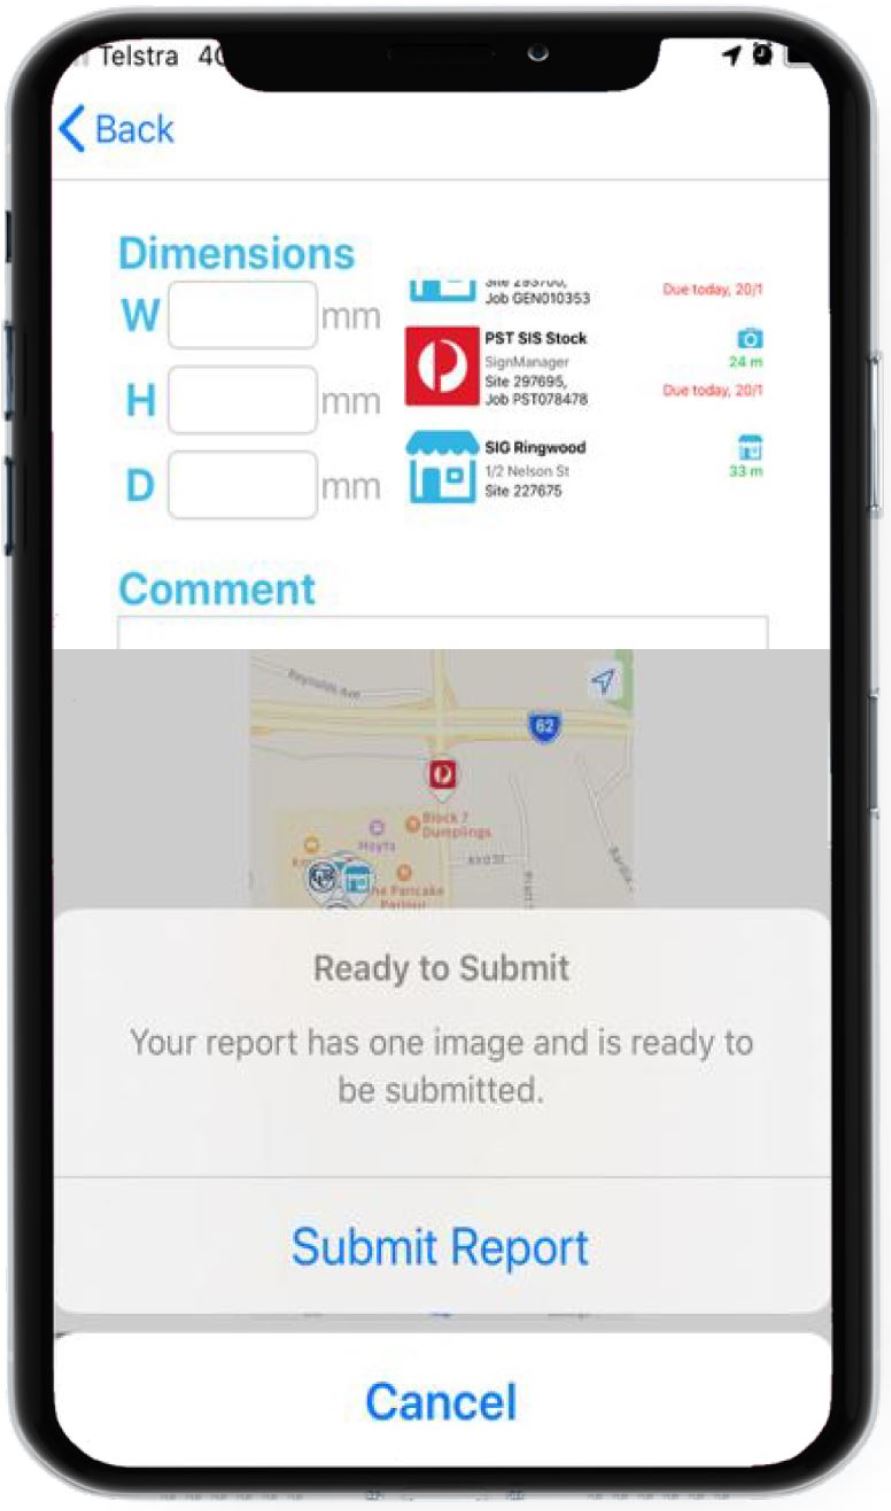 SignManager SignSpot App features